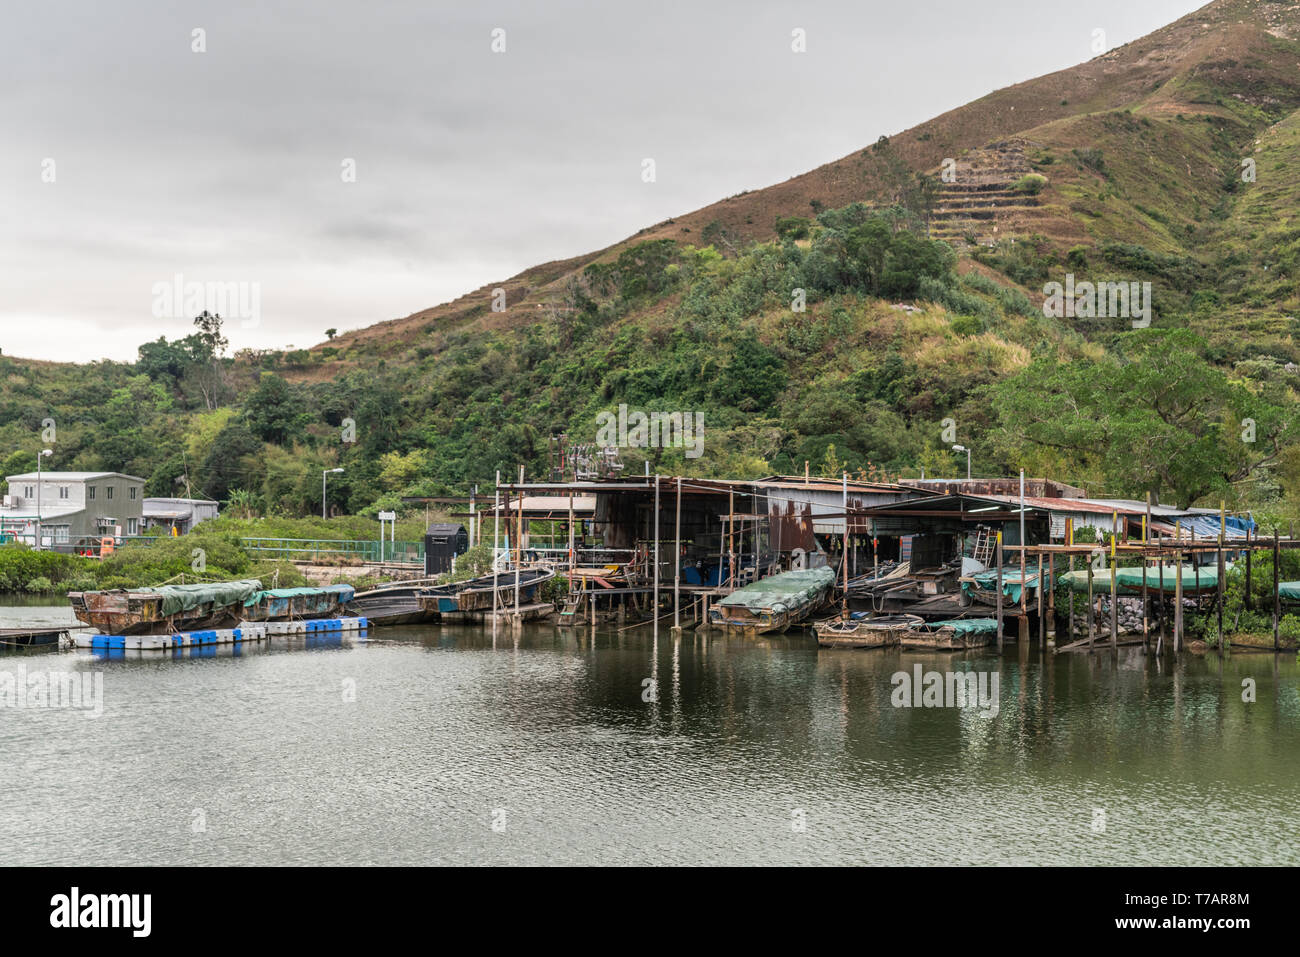 Hong Kong, China - March 7, 2019: Fishermen houses on stilts on Tai O River with large green hill in back under gray sky. Sloops, tarps and simple dwe Stock Photo